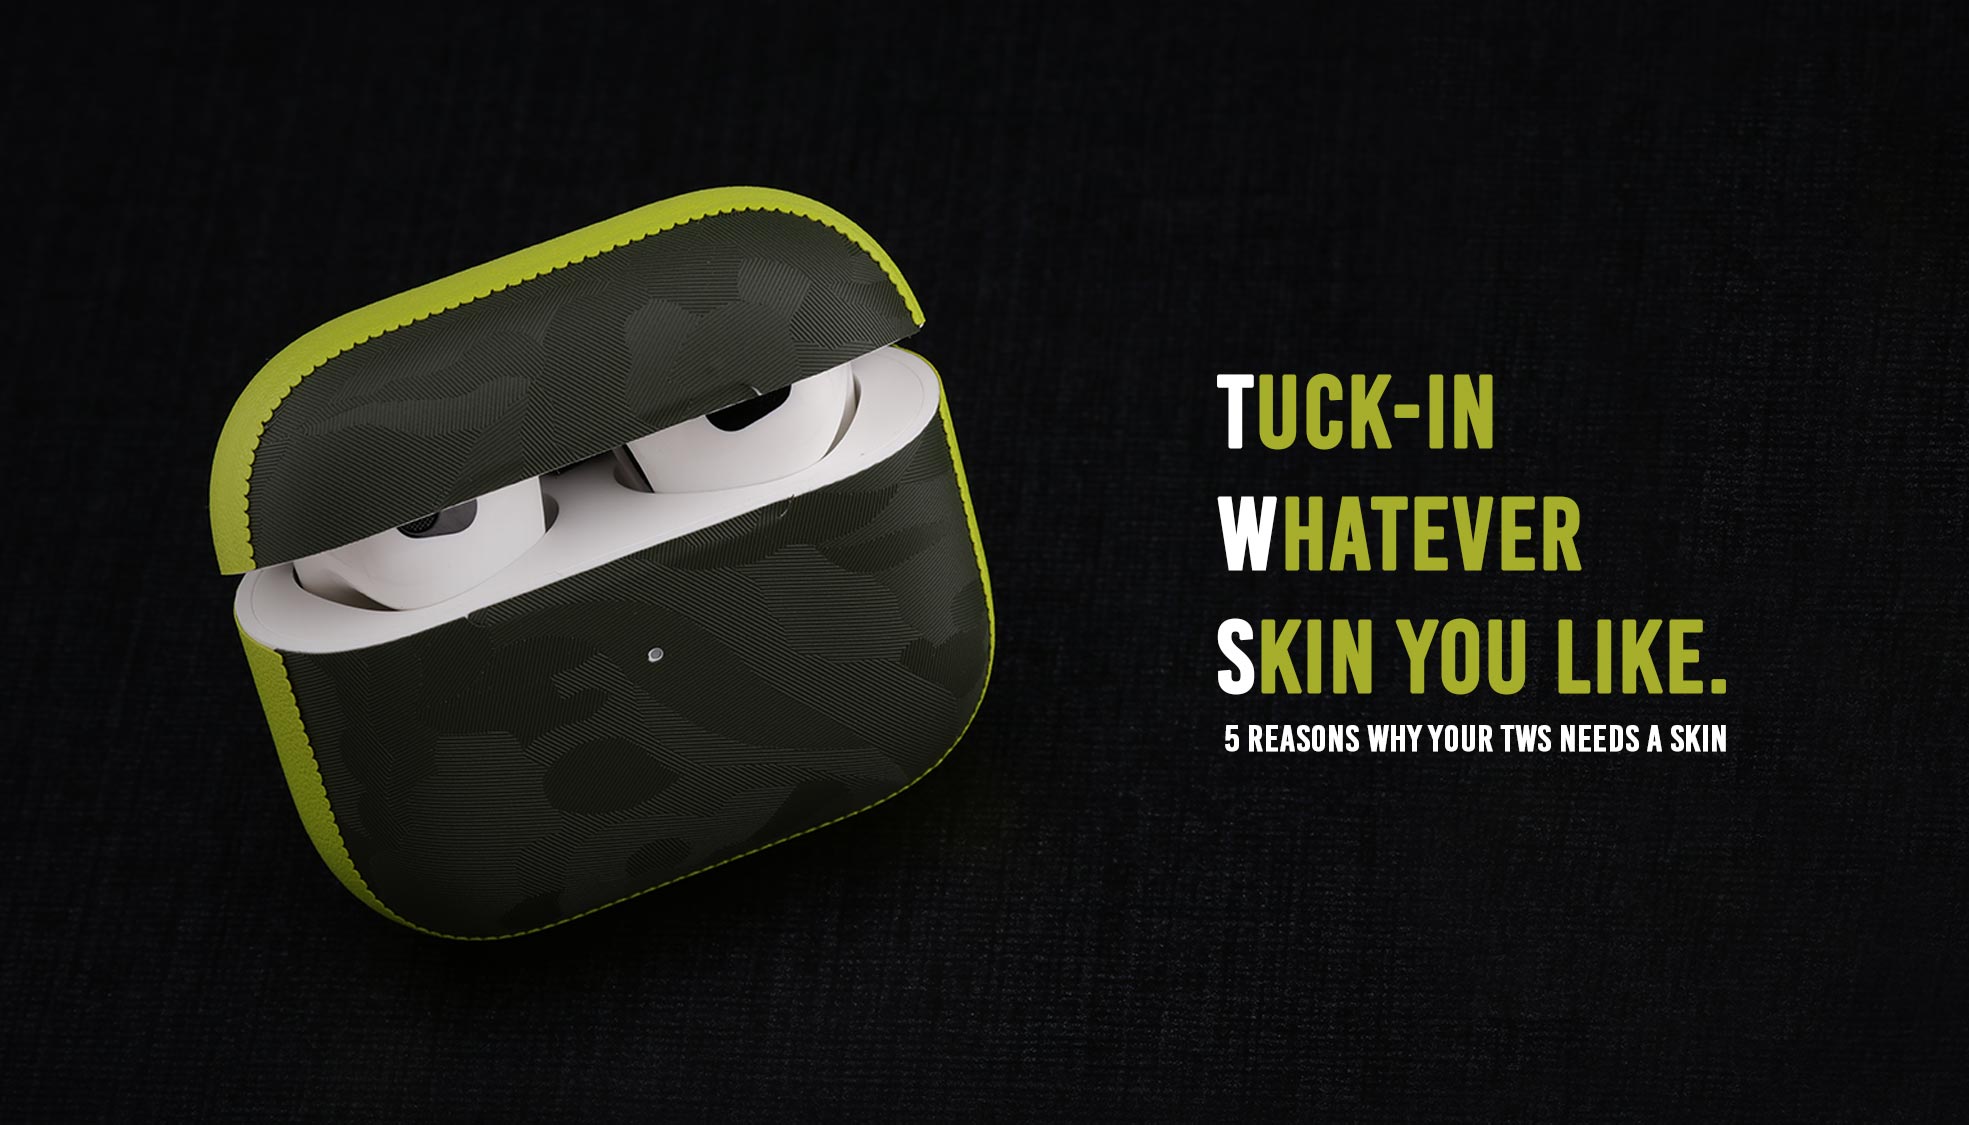 Why would you SKIN your TWS?